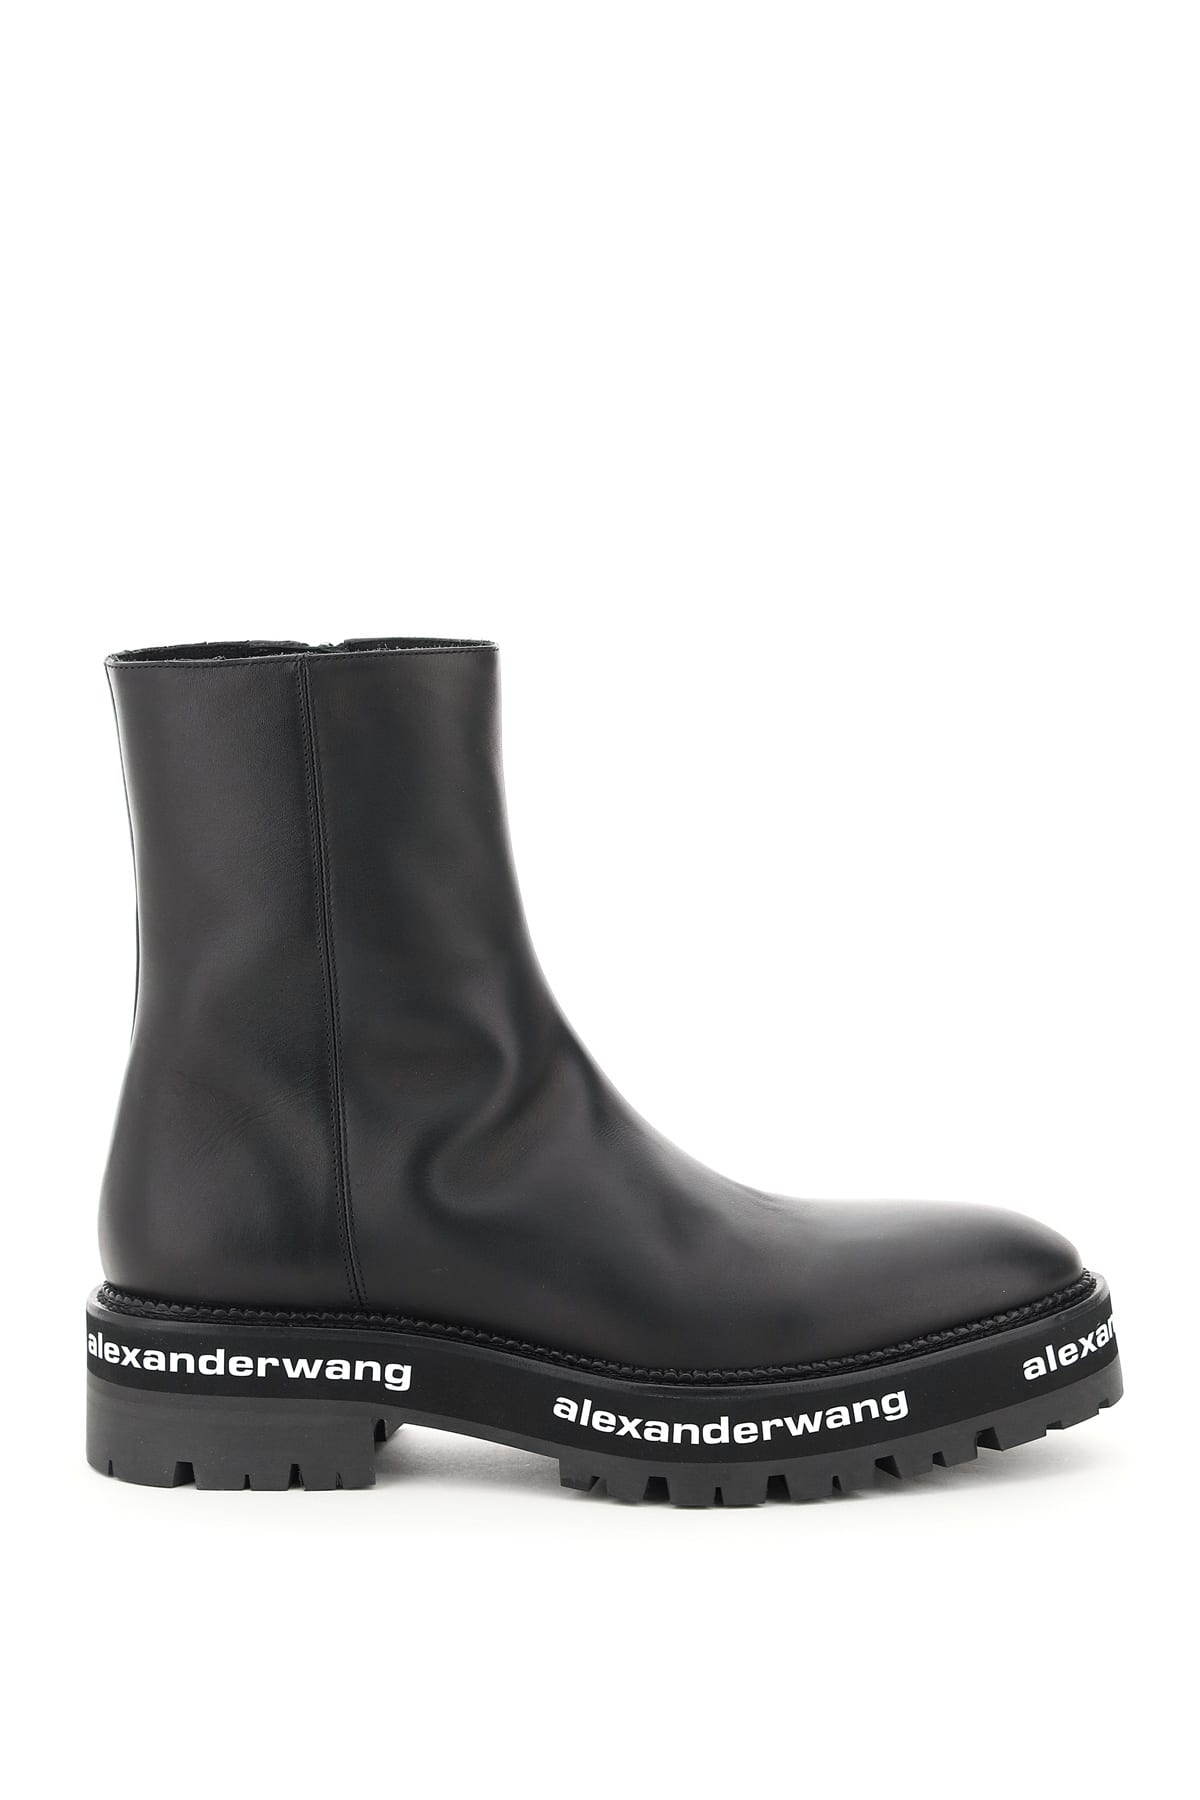 Alexander Wang Sanford Leather Boots